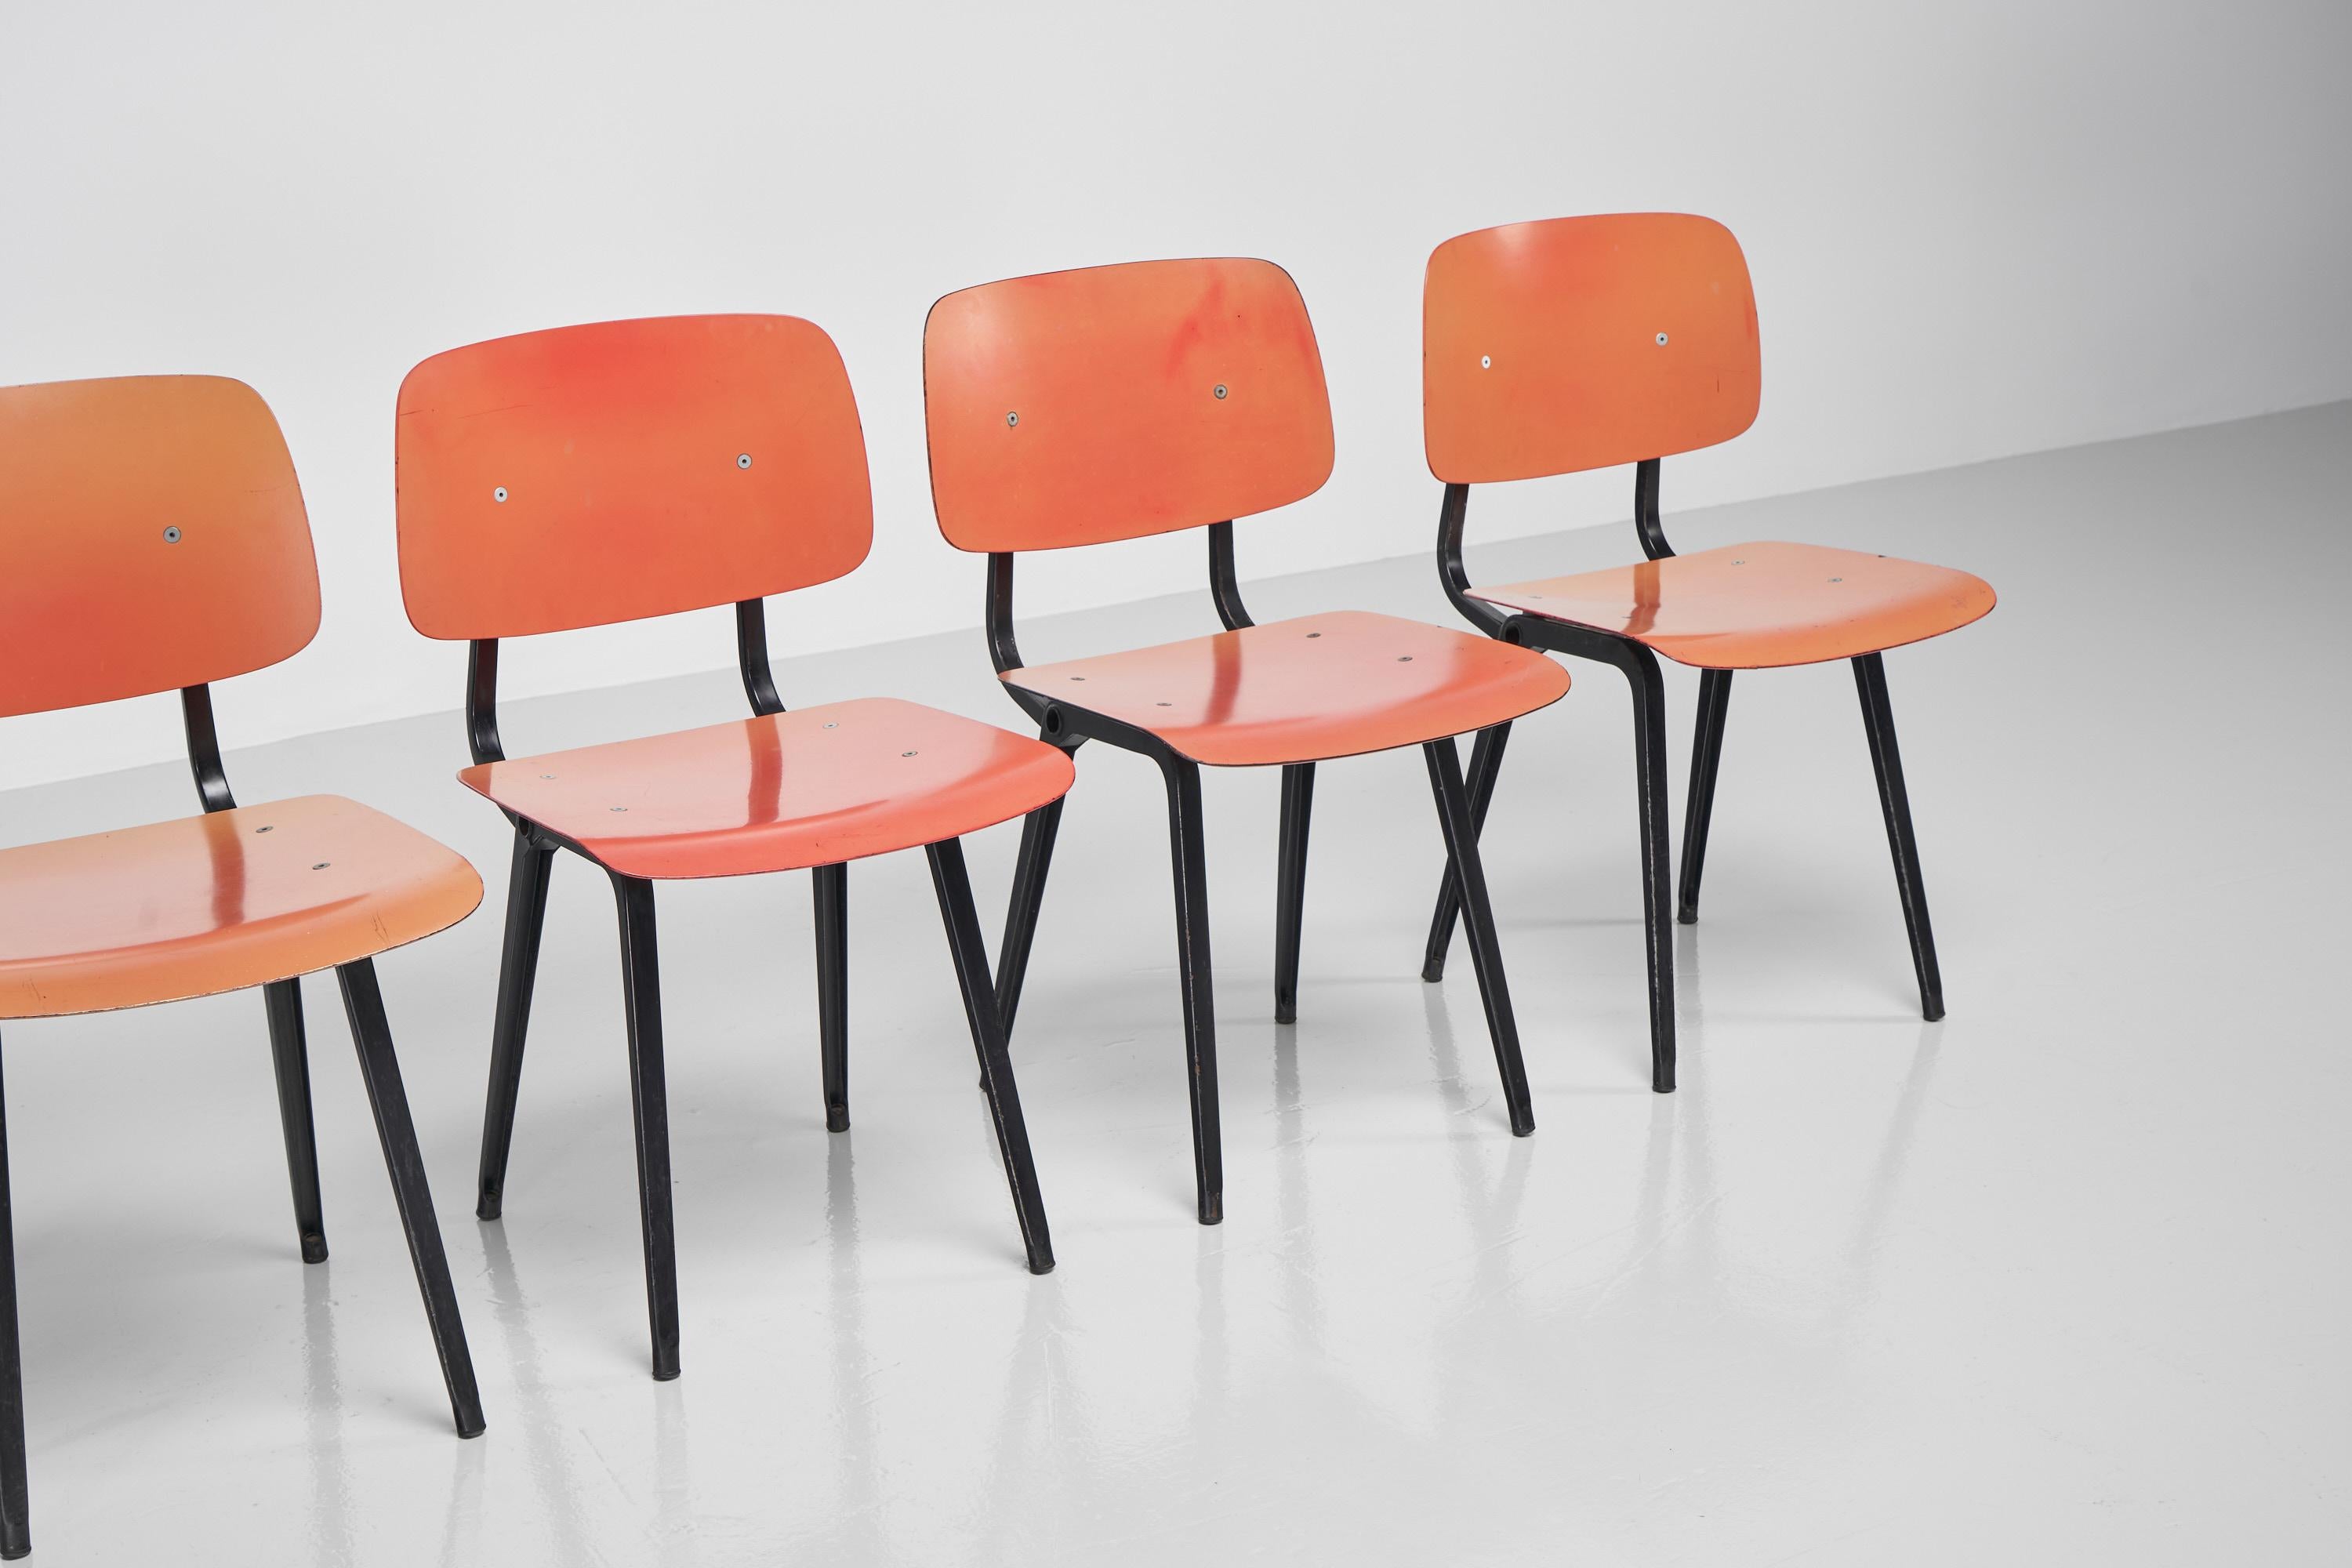 Iconic set of 6 so called 'Revolt' chairs designed by Friso Kramer and manufactured by Ahrend de Cirkel, Holland 1960s. Though the Revolt chair was already designed in 1953, the production started in 1958 and these specific chairs are from the